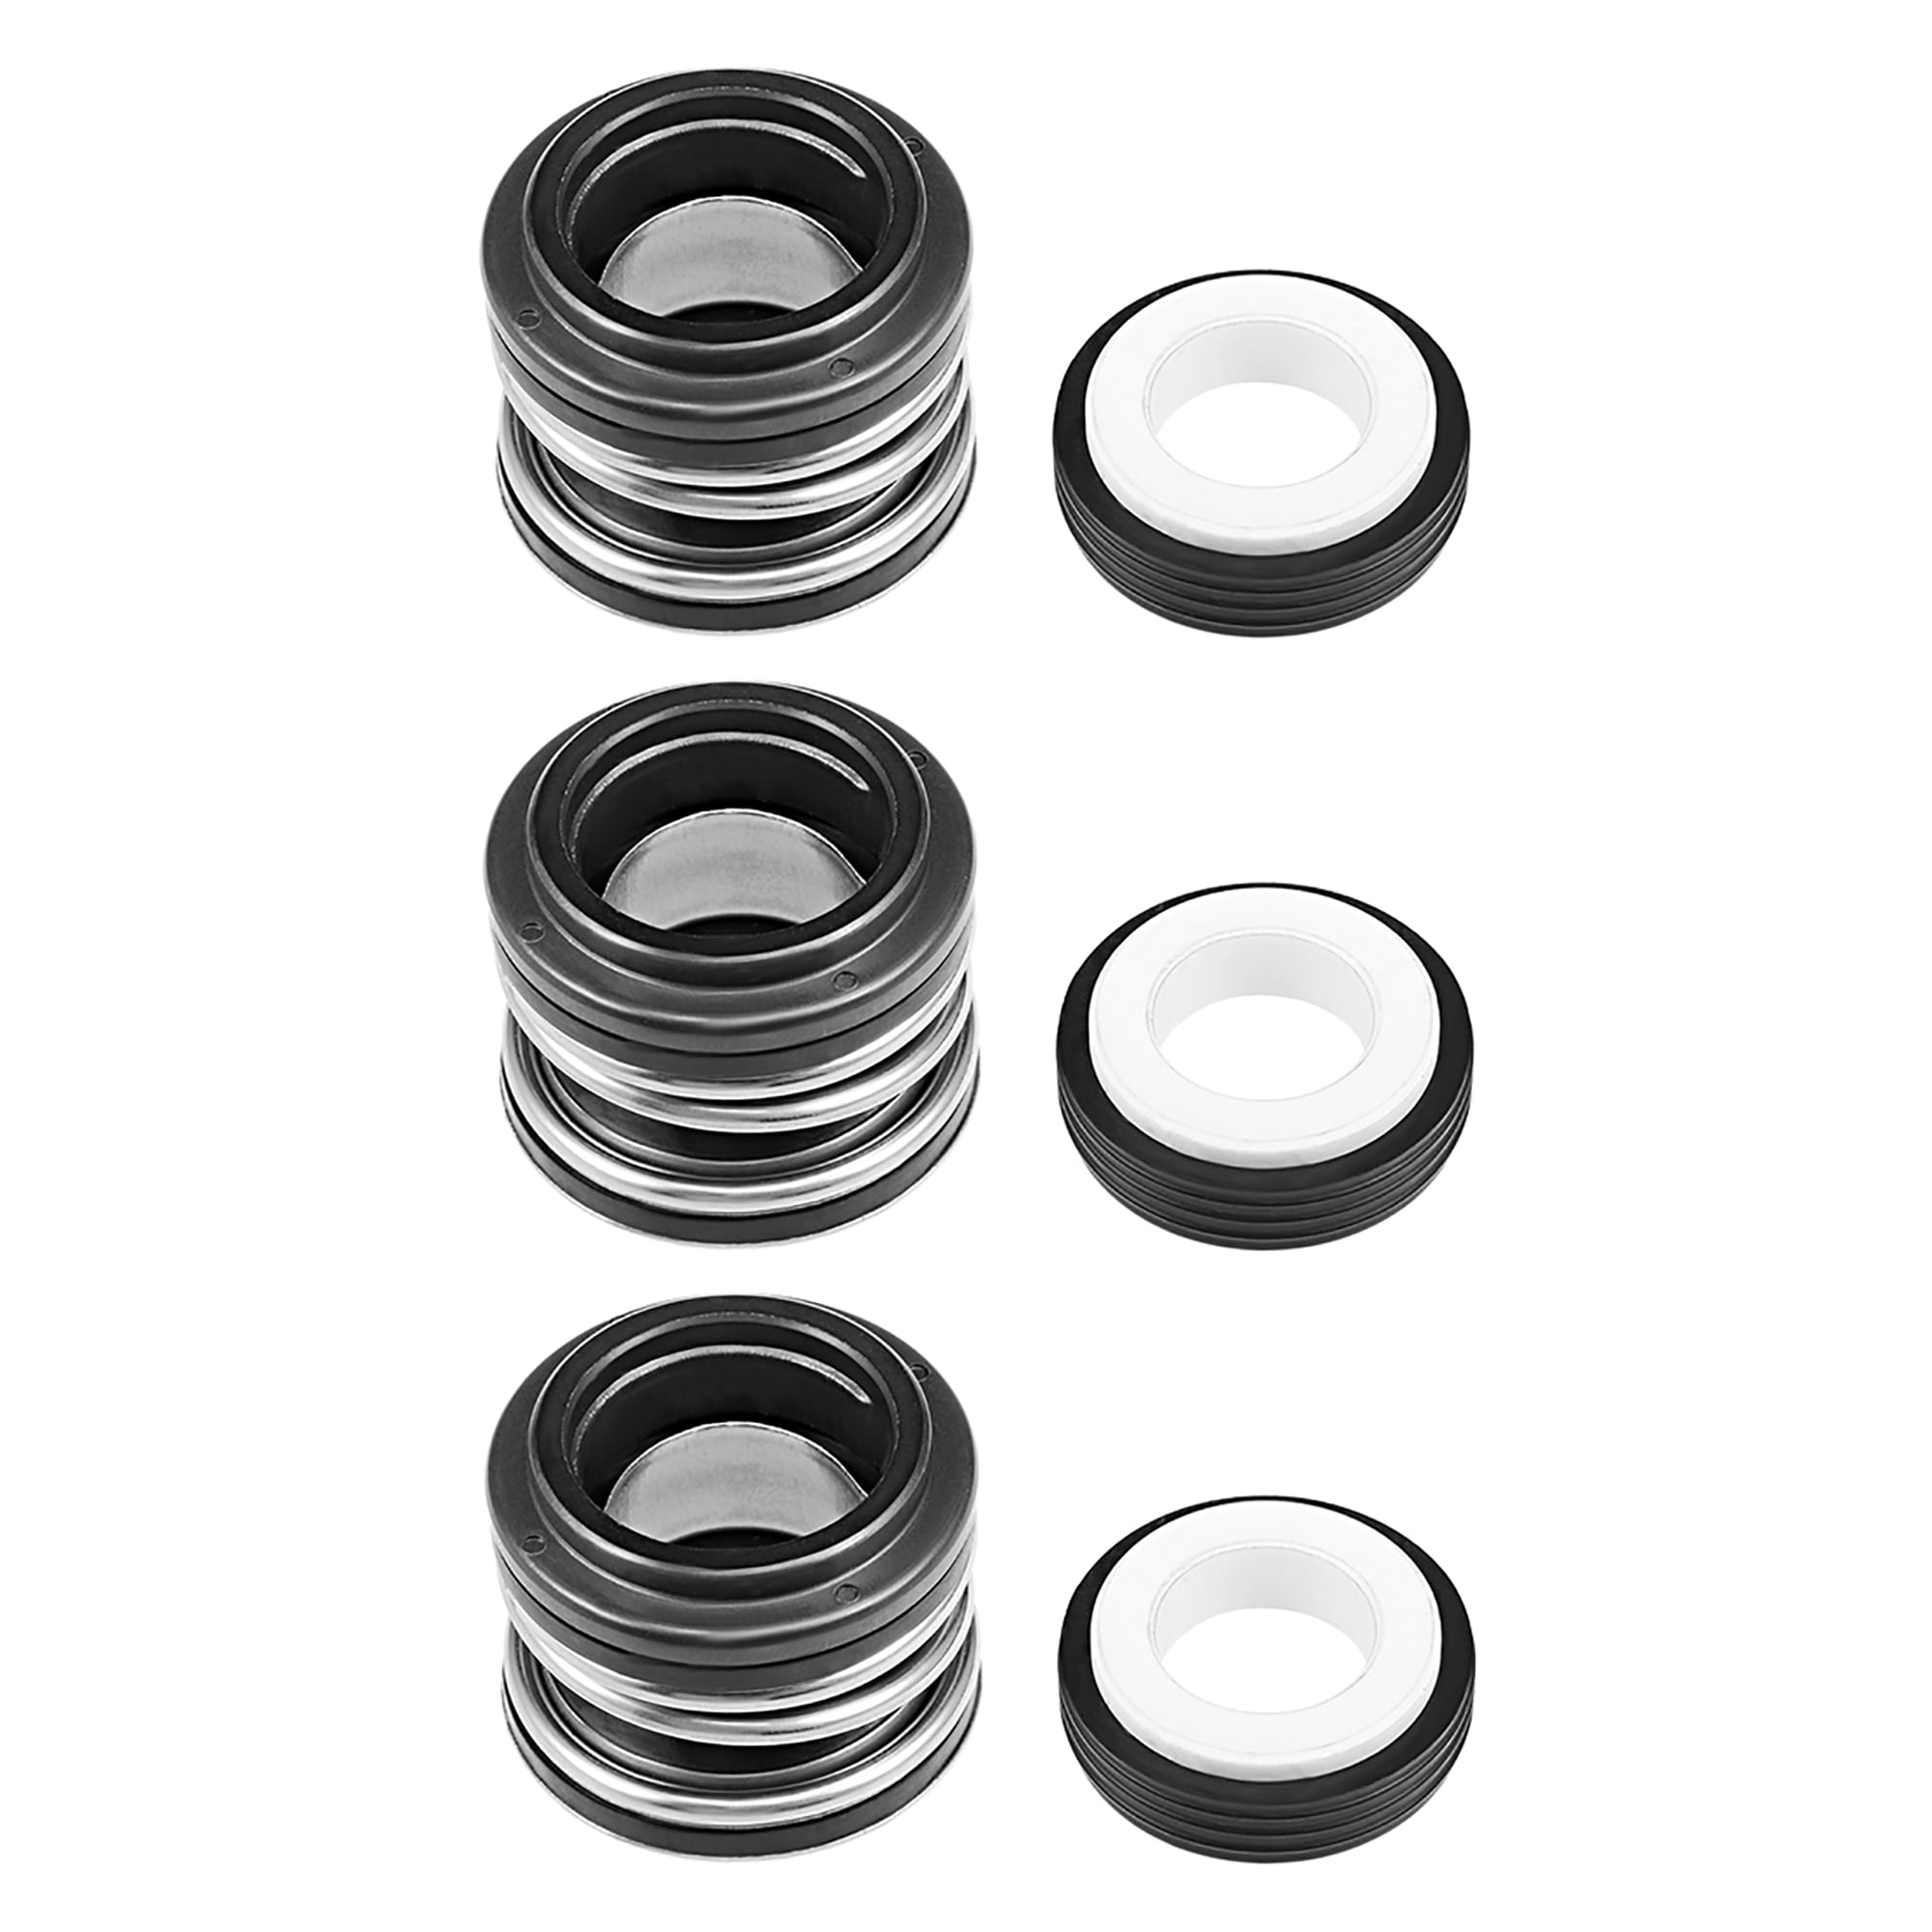 Mechanical Shaft Seal Replacement for Pool Spa Pump 3pcs XJ-16 